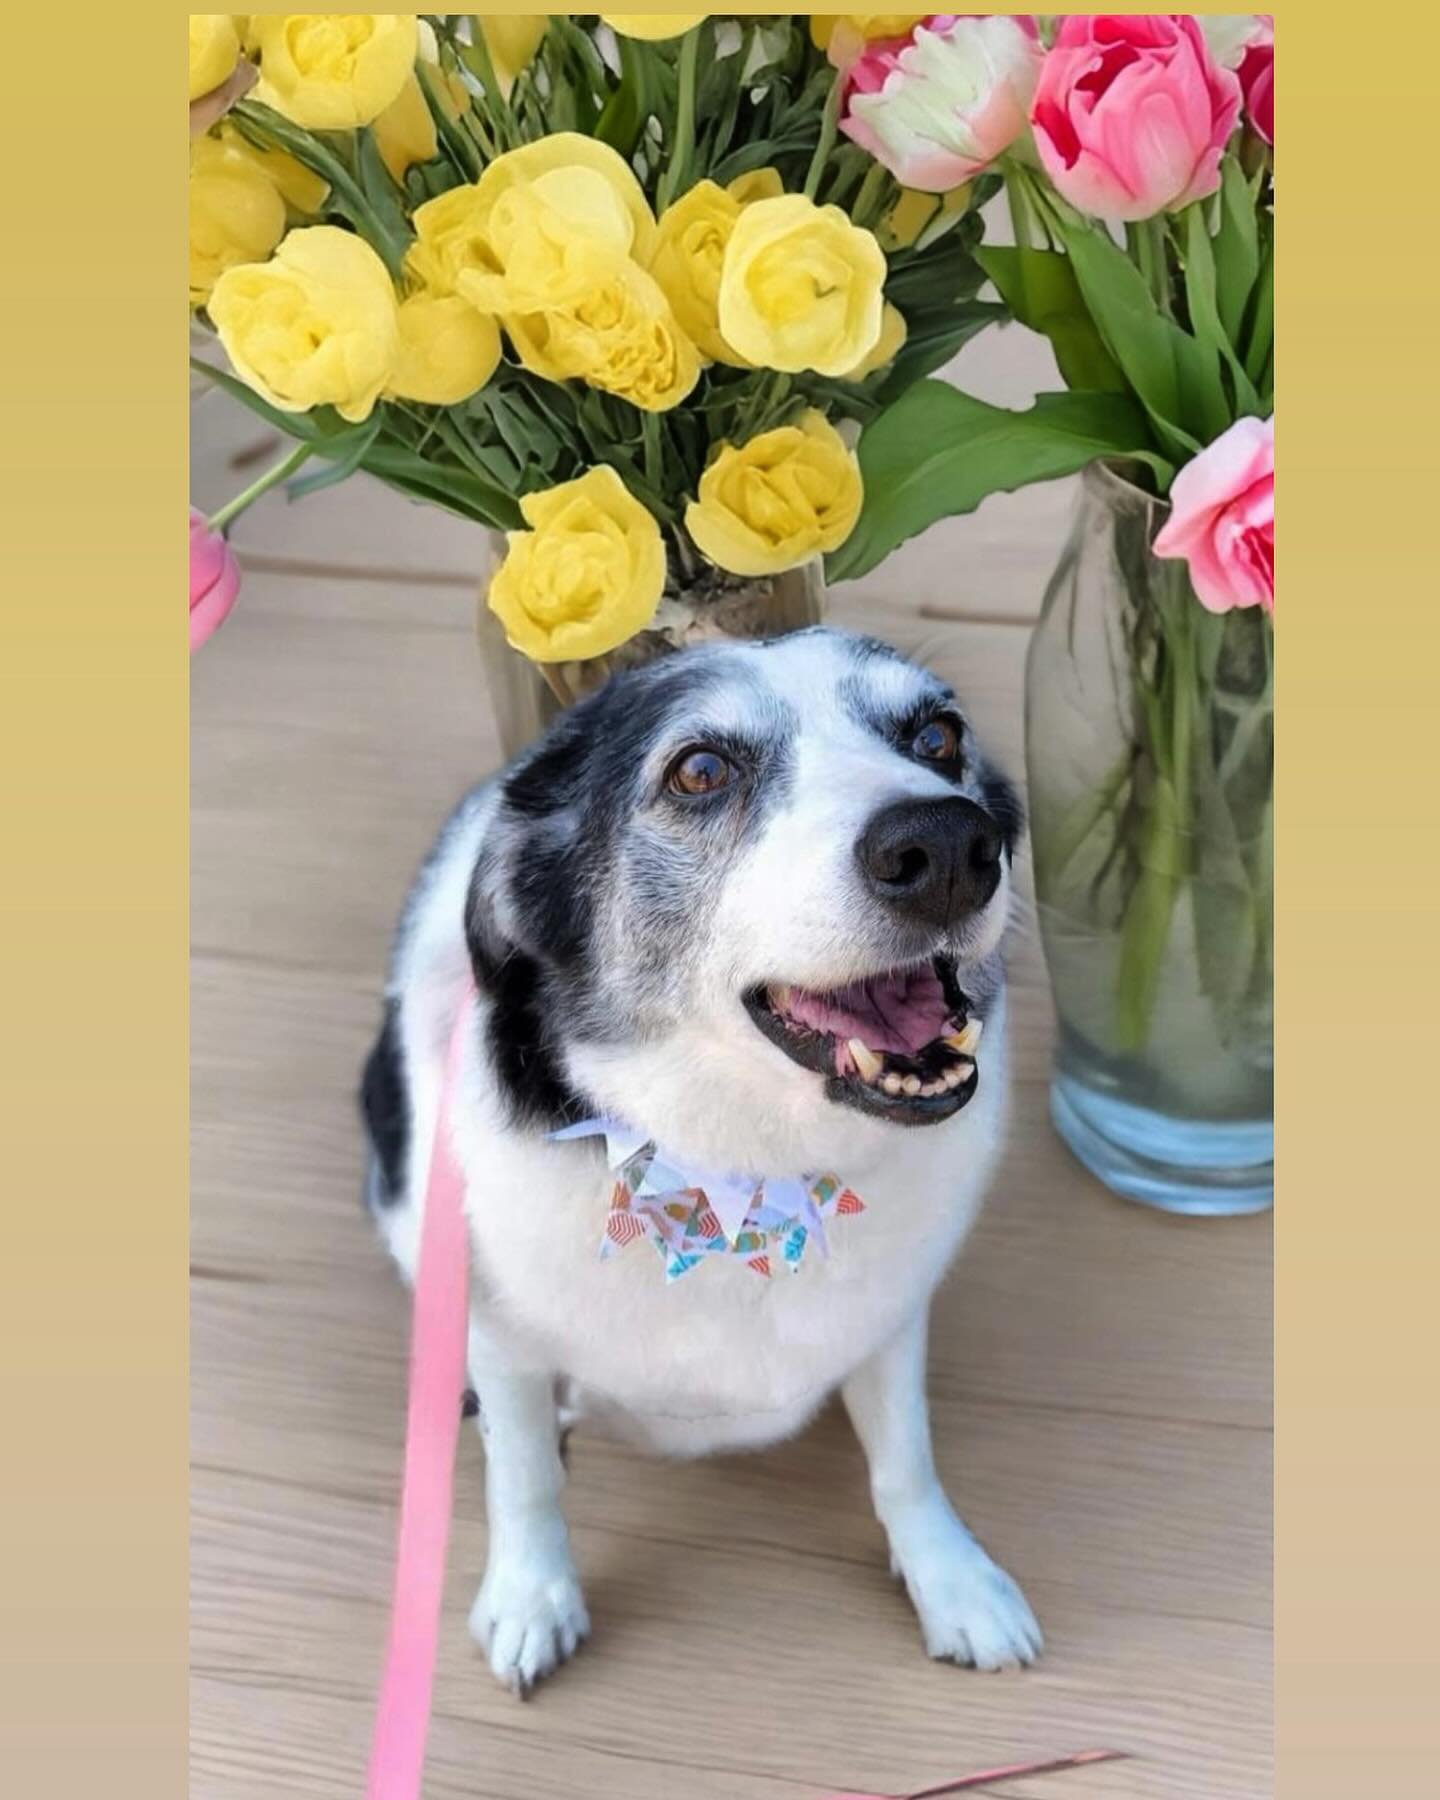 💐🐾We wanted to take a moment to wish all the fantastic dog mamas out there a very Happy Mother&rsquo;s Day from SDRO! 🐾💐

You&rsquo;re all amazing pet parents and deserve all the love and appreciation for being such wonderful caretakers for your 